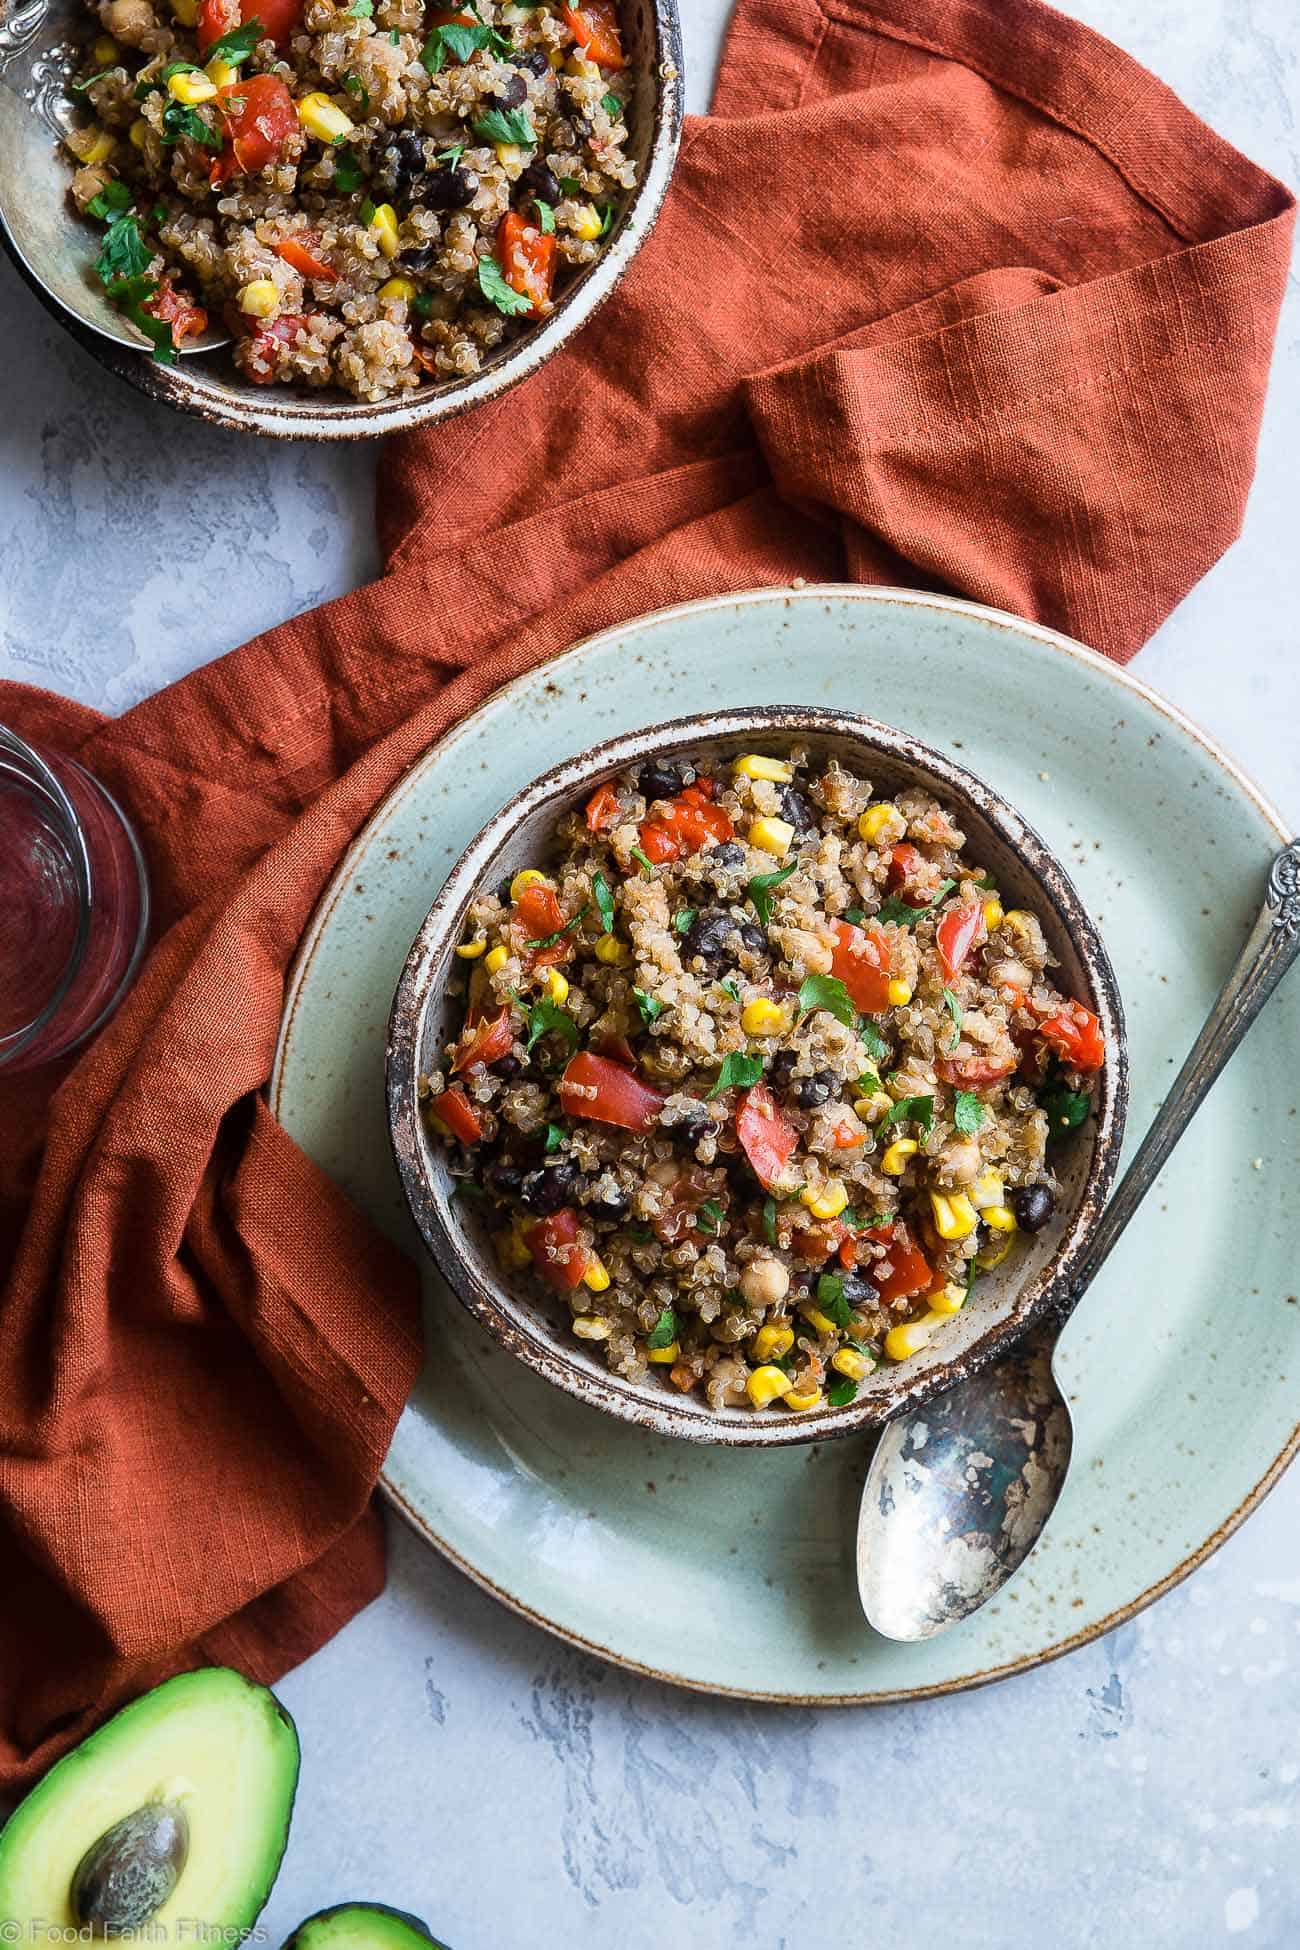 Slow Cooker Mexican Quinoa Casserole - Let the slow cooker do the work for you with this family friendly, healthy weeknight dinner!  Gluten free with a vegan option and even picky eaters love it! | #FoodFaithFitness | #Quinoa #Glutenfree #Healthy #Vegan #Vegetarian